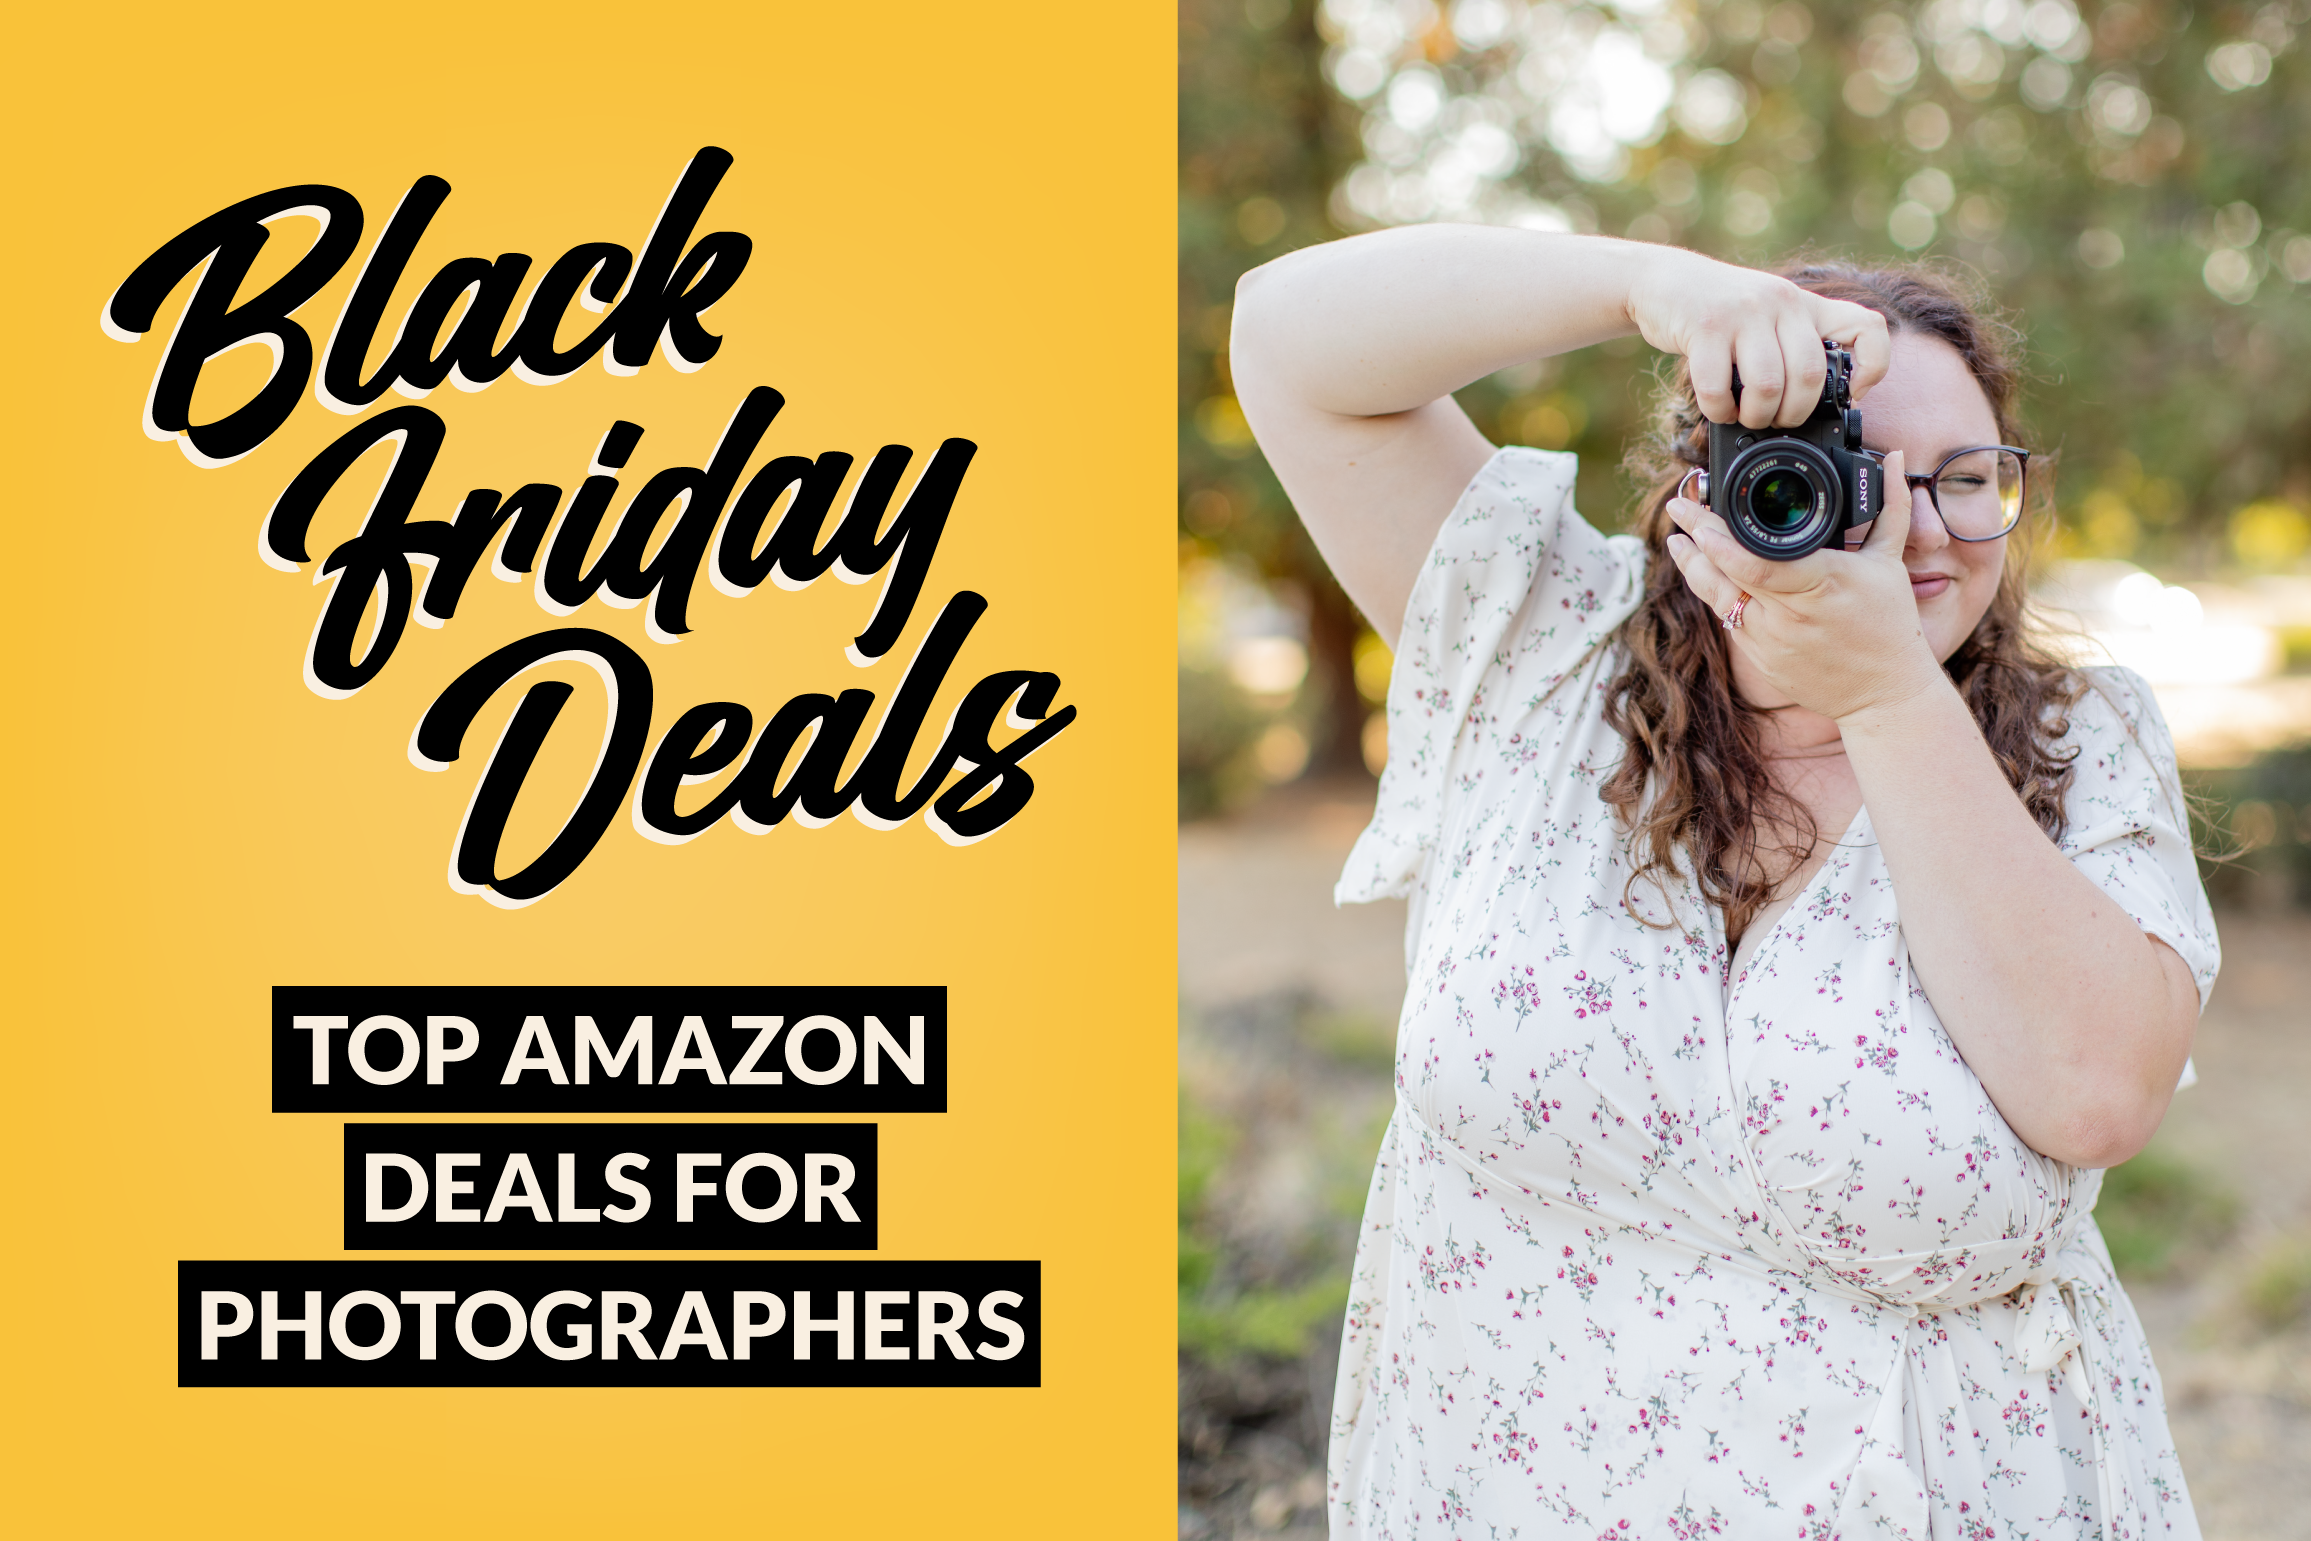 image of a photographer with the text: Black Friday Deals